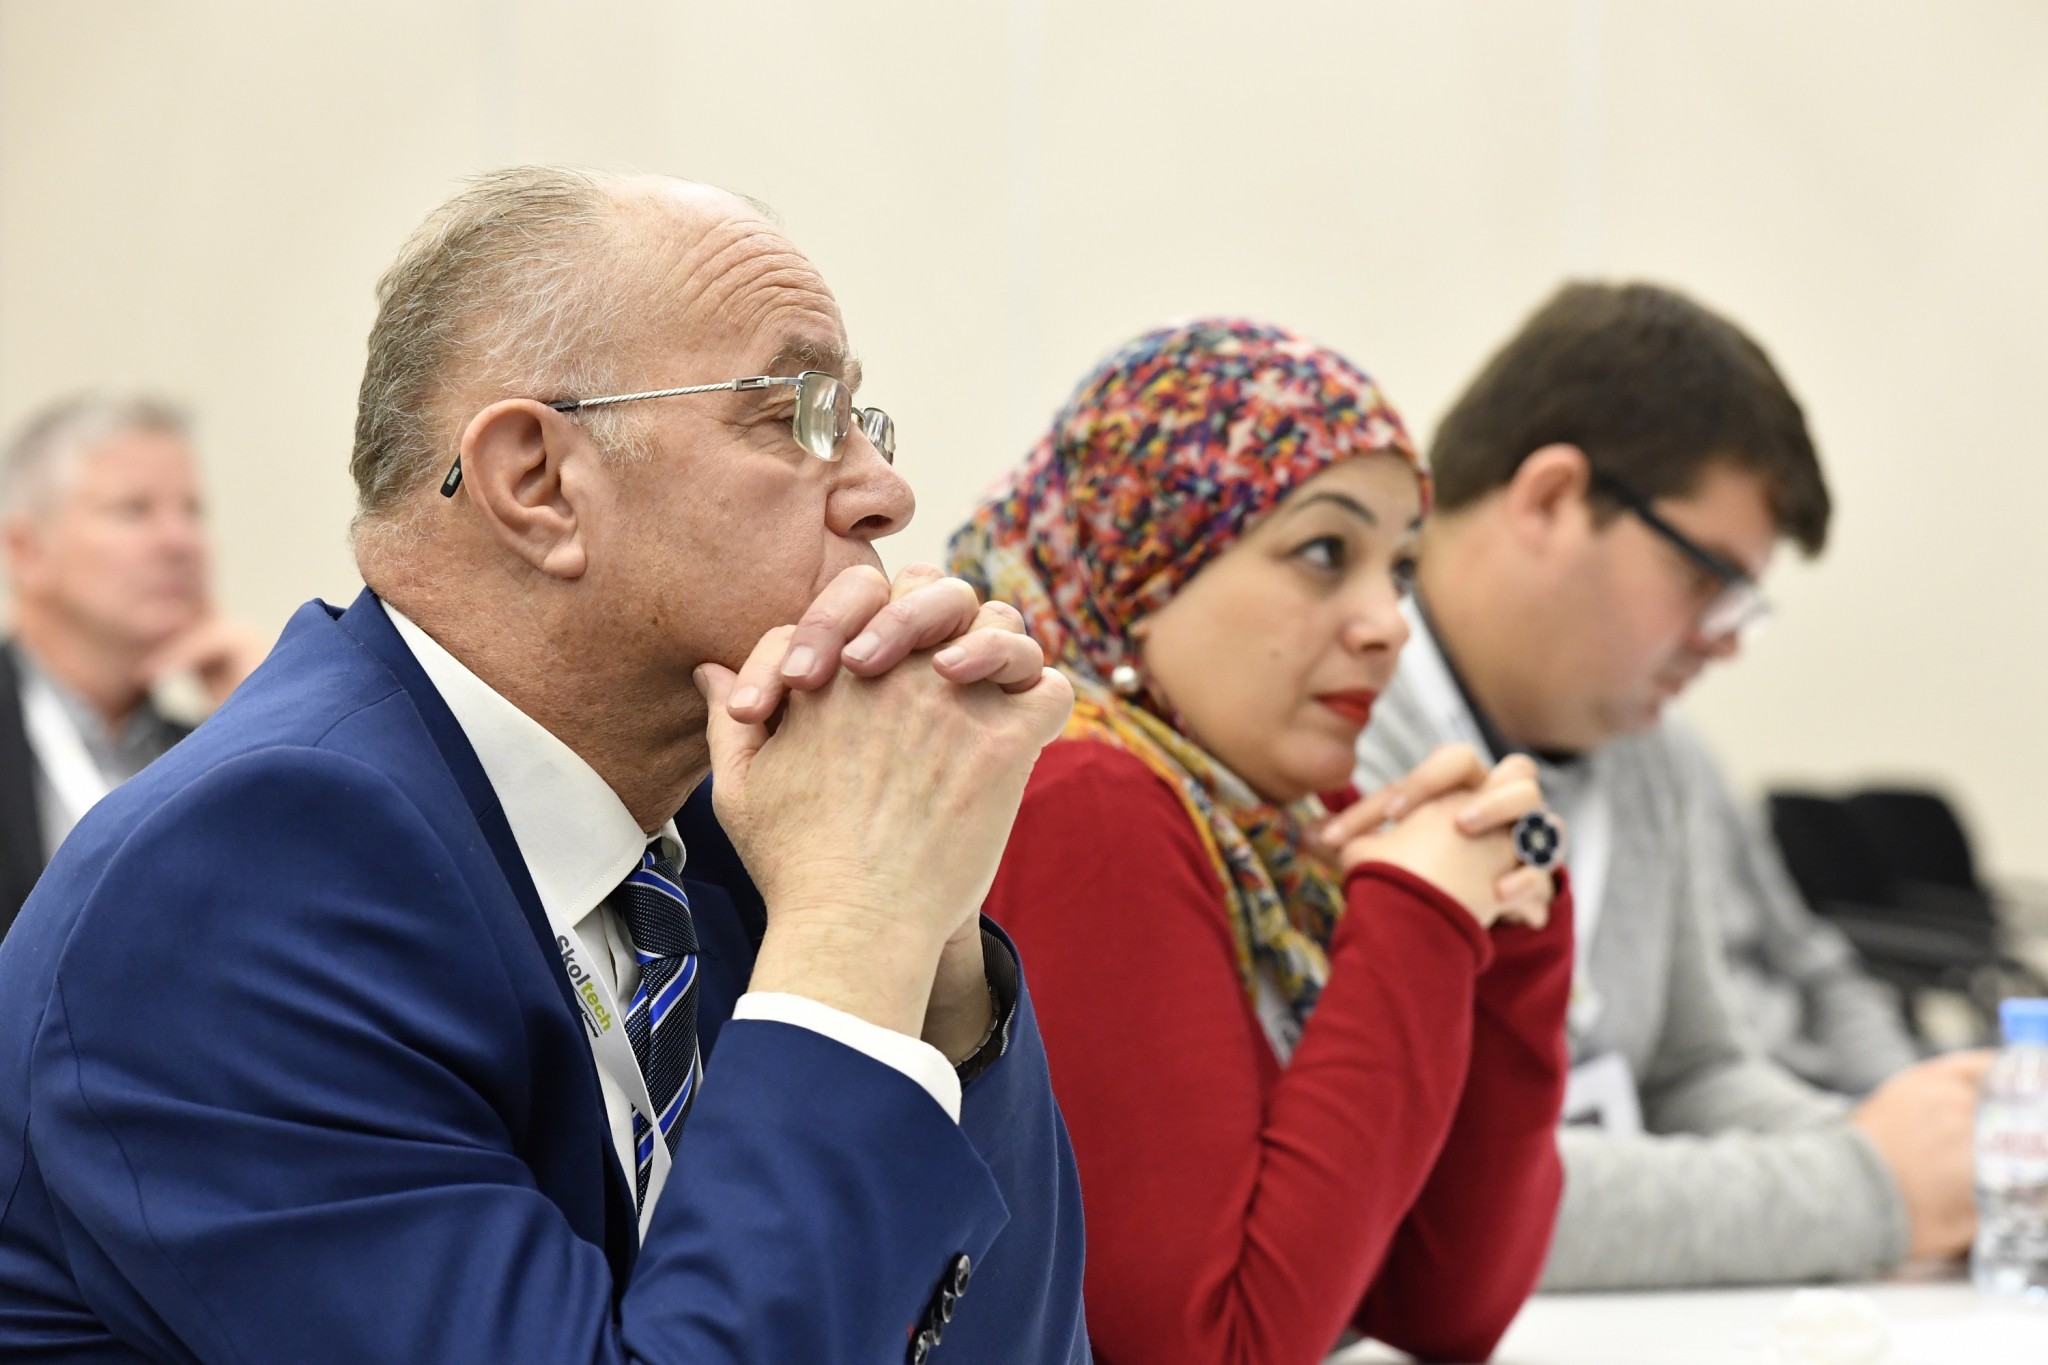 Attendees participate in a CDIO workshop. Photo: Skoltech.